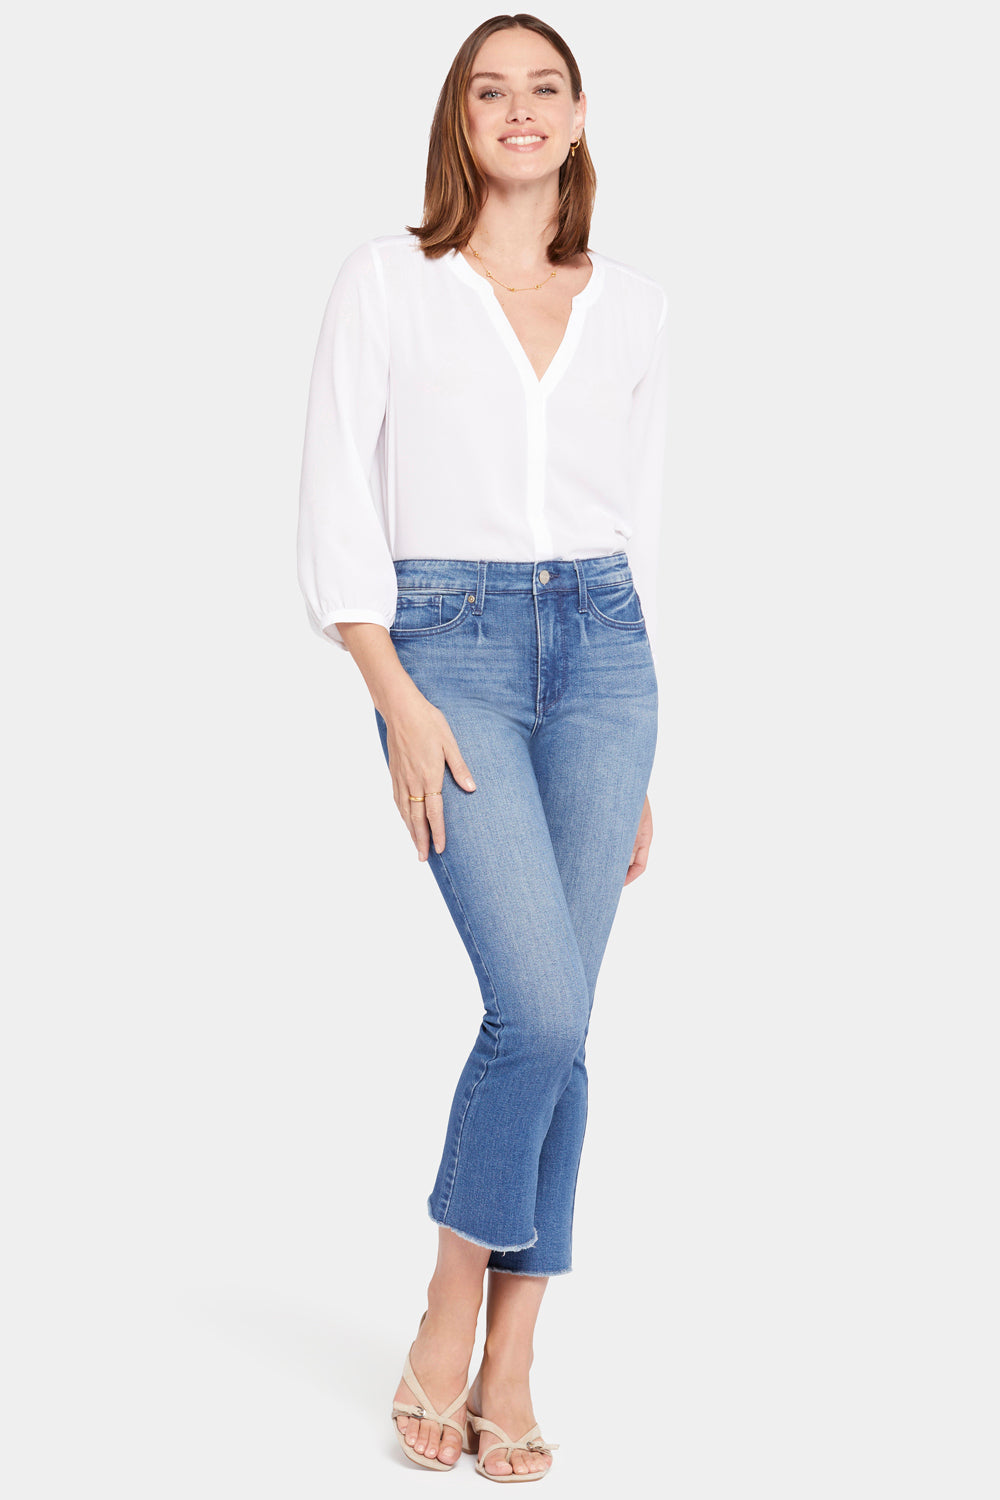 NYDJ Slim Bootcut Ankle Jeans With High Rise And Frayed Hems - Heartland